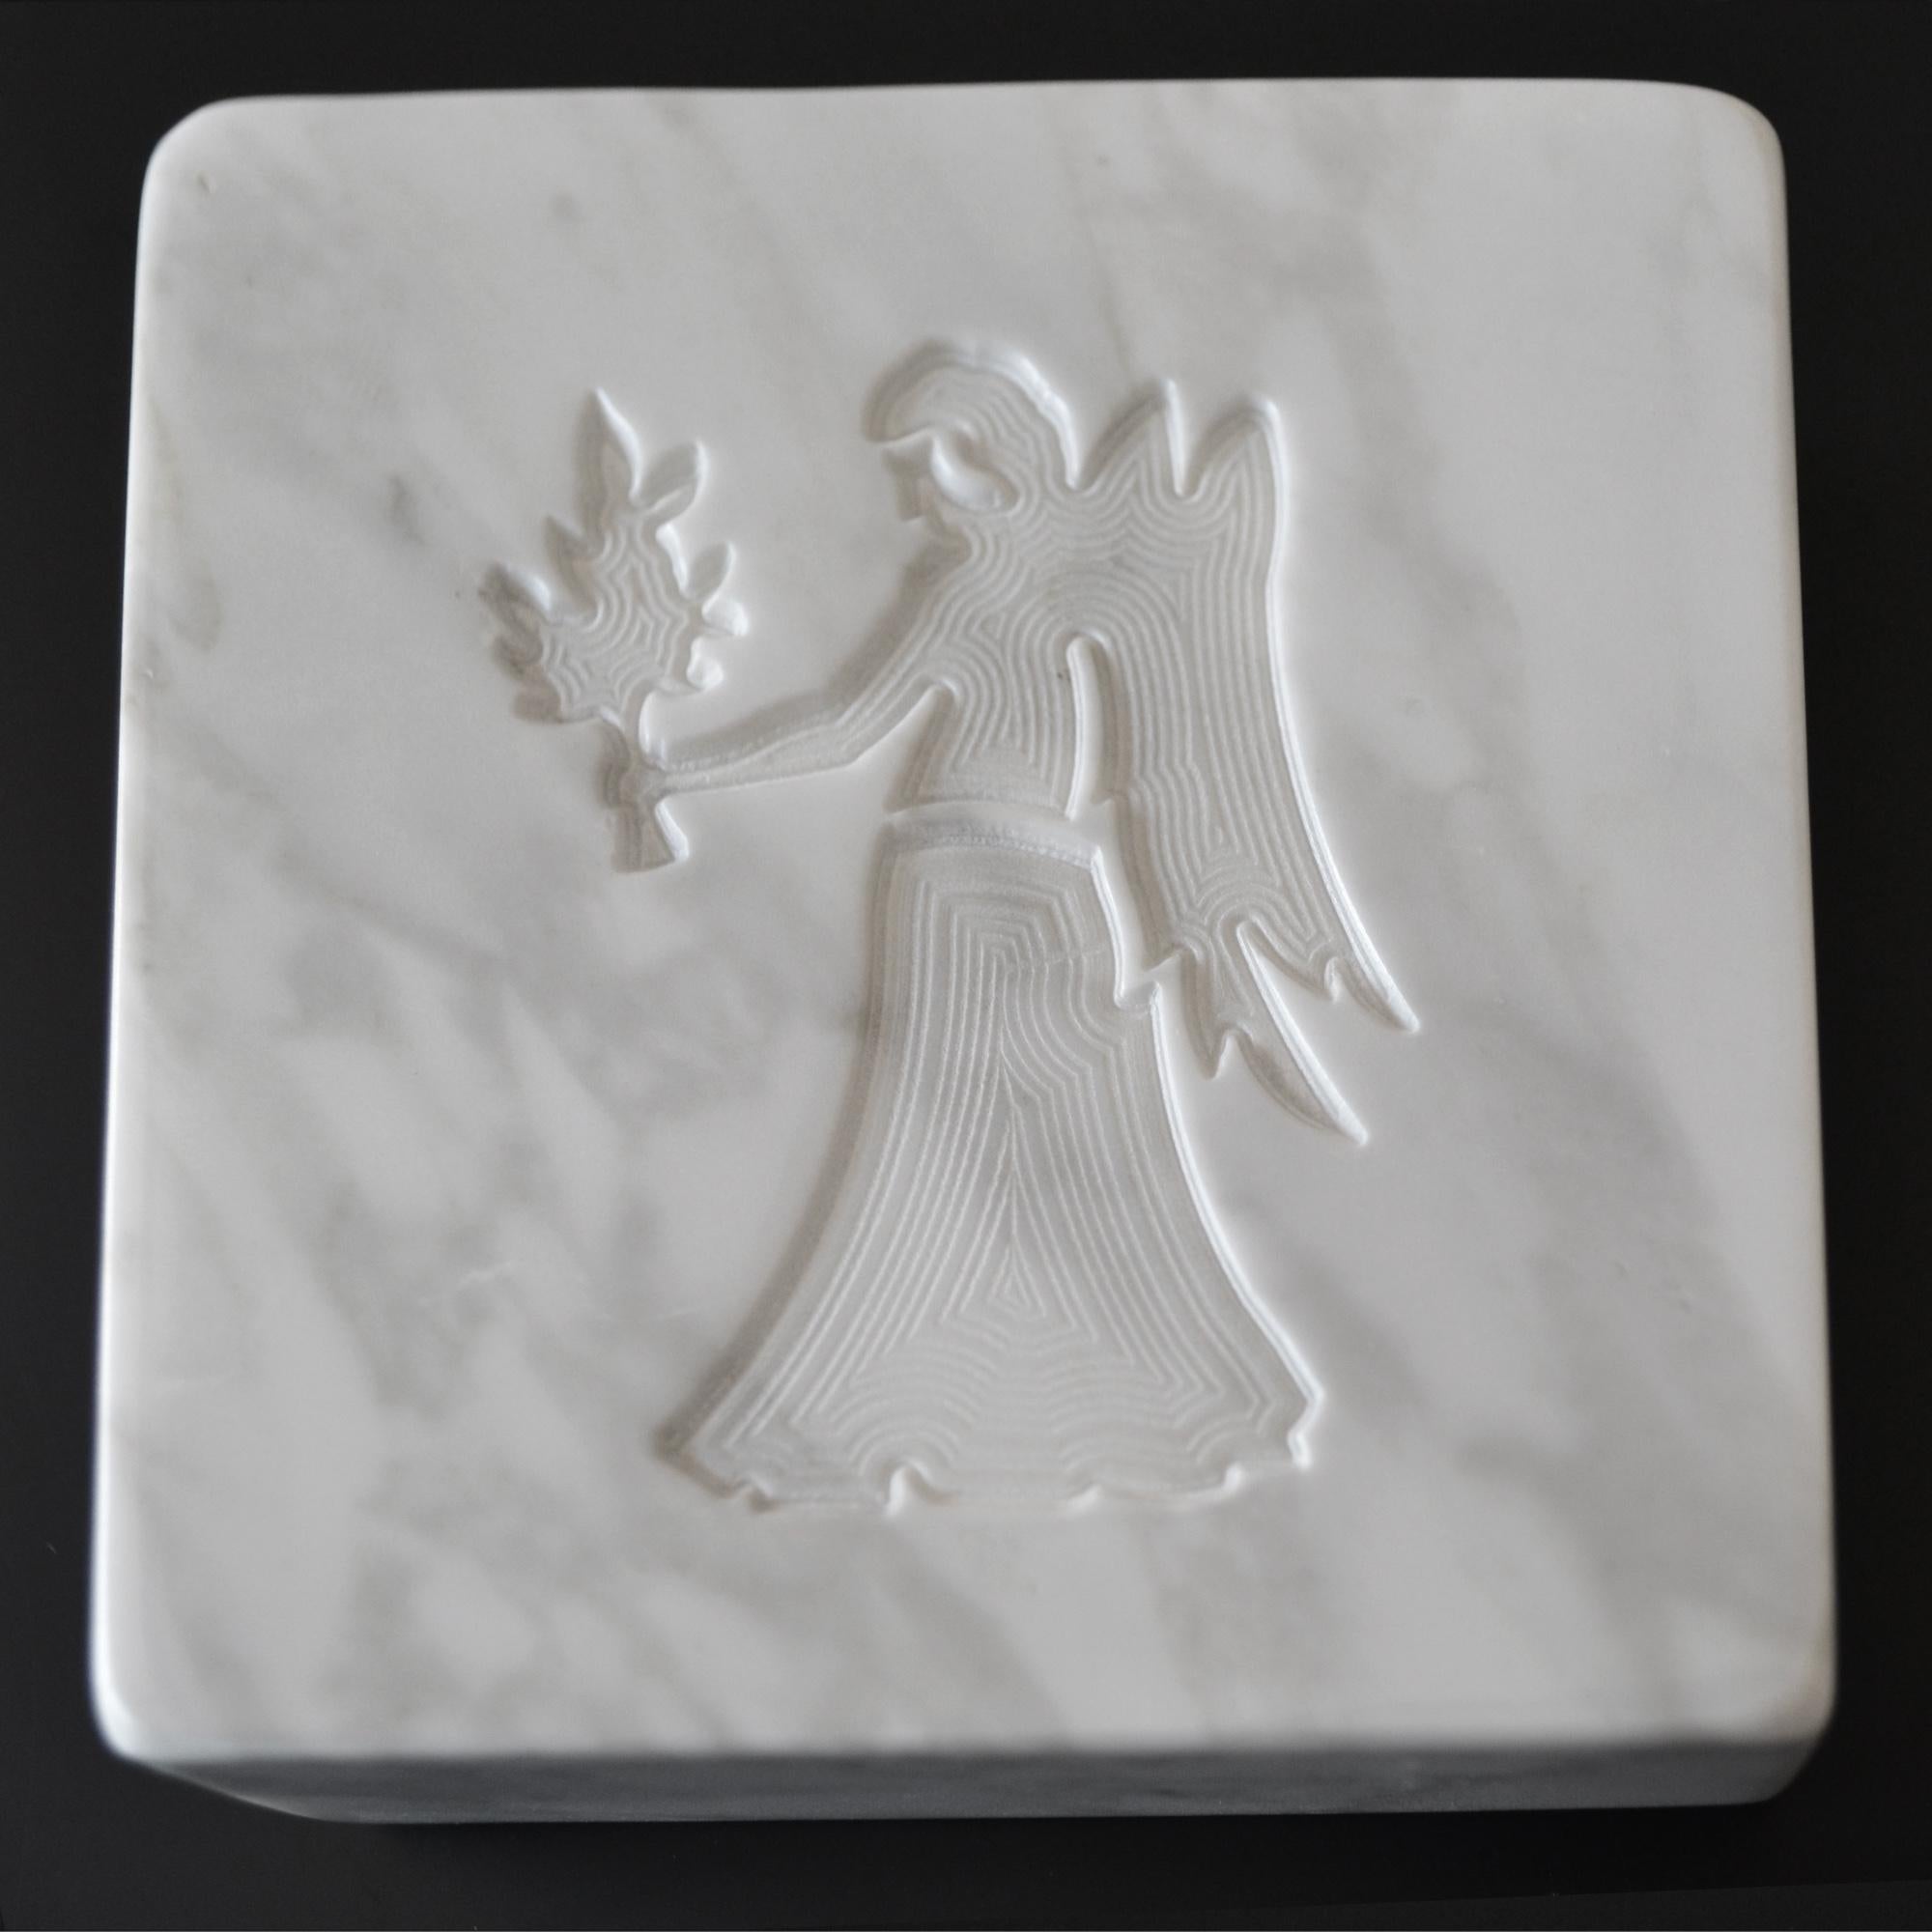 Paperweight manufactured in White Carrara Italian marble with inlaid zodiac sign. You can choose the sign, see on the diagram.
Weight: kilos 0.9 each one

For EU buyers this piece is subject to additional VAT tax, which will be added to the price